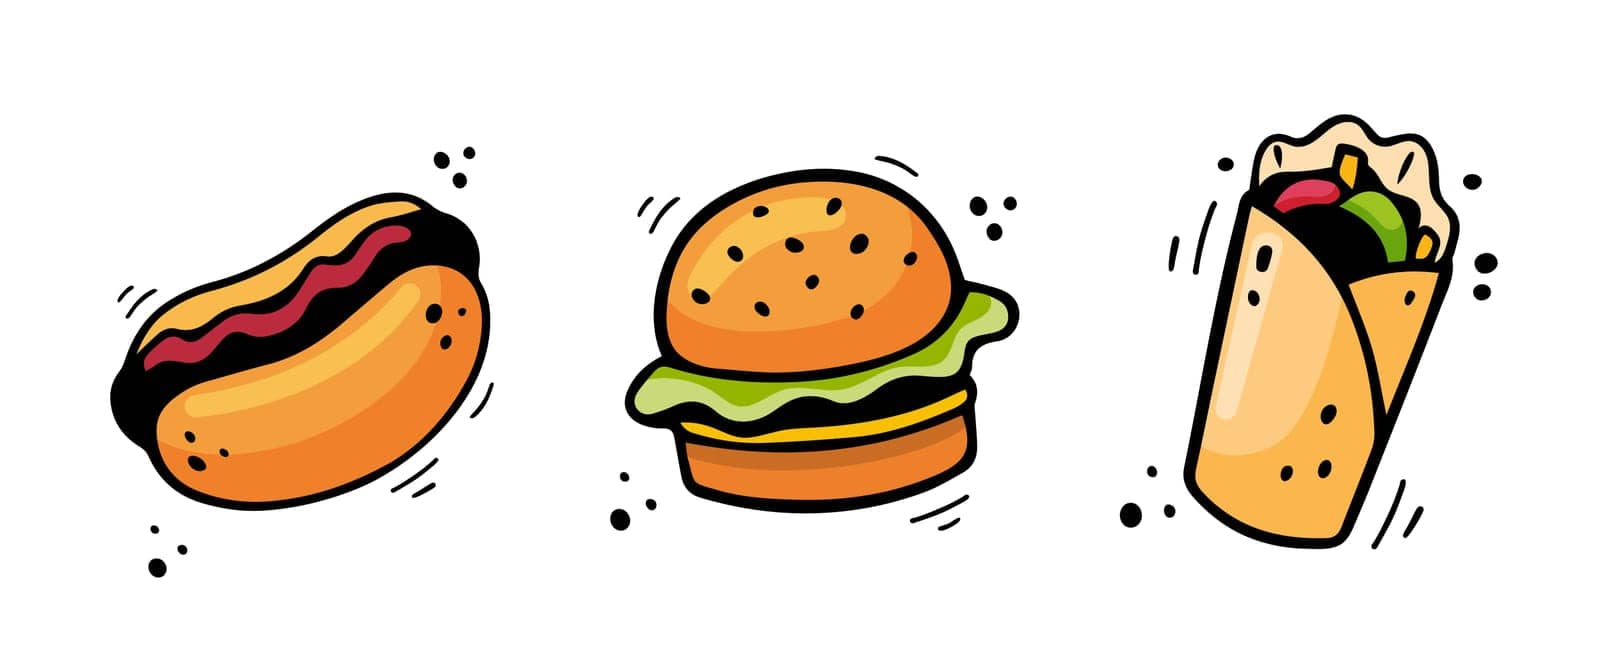 Hand drawn fast food icons. Sketch of Hot dog, Hamburger, Doner Kebab. Fast food illustration in doodle style. by KateArtery19